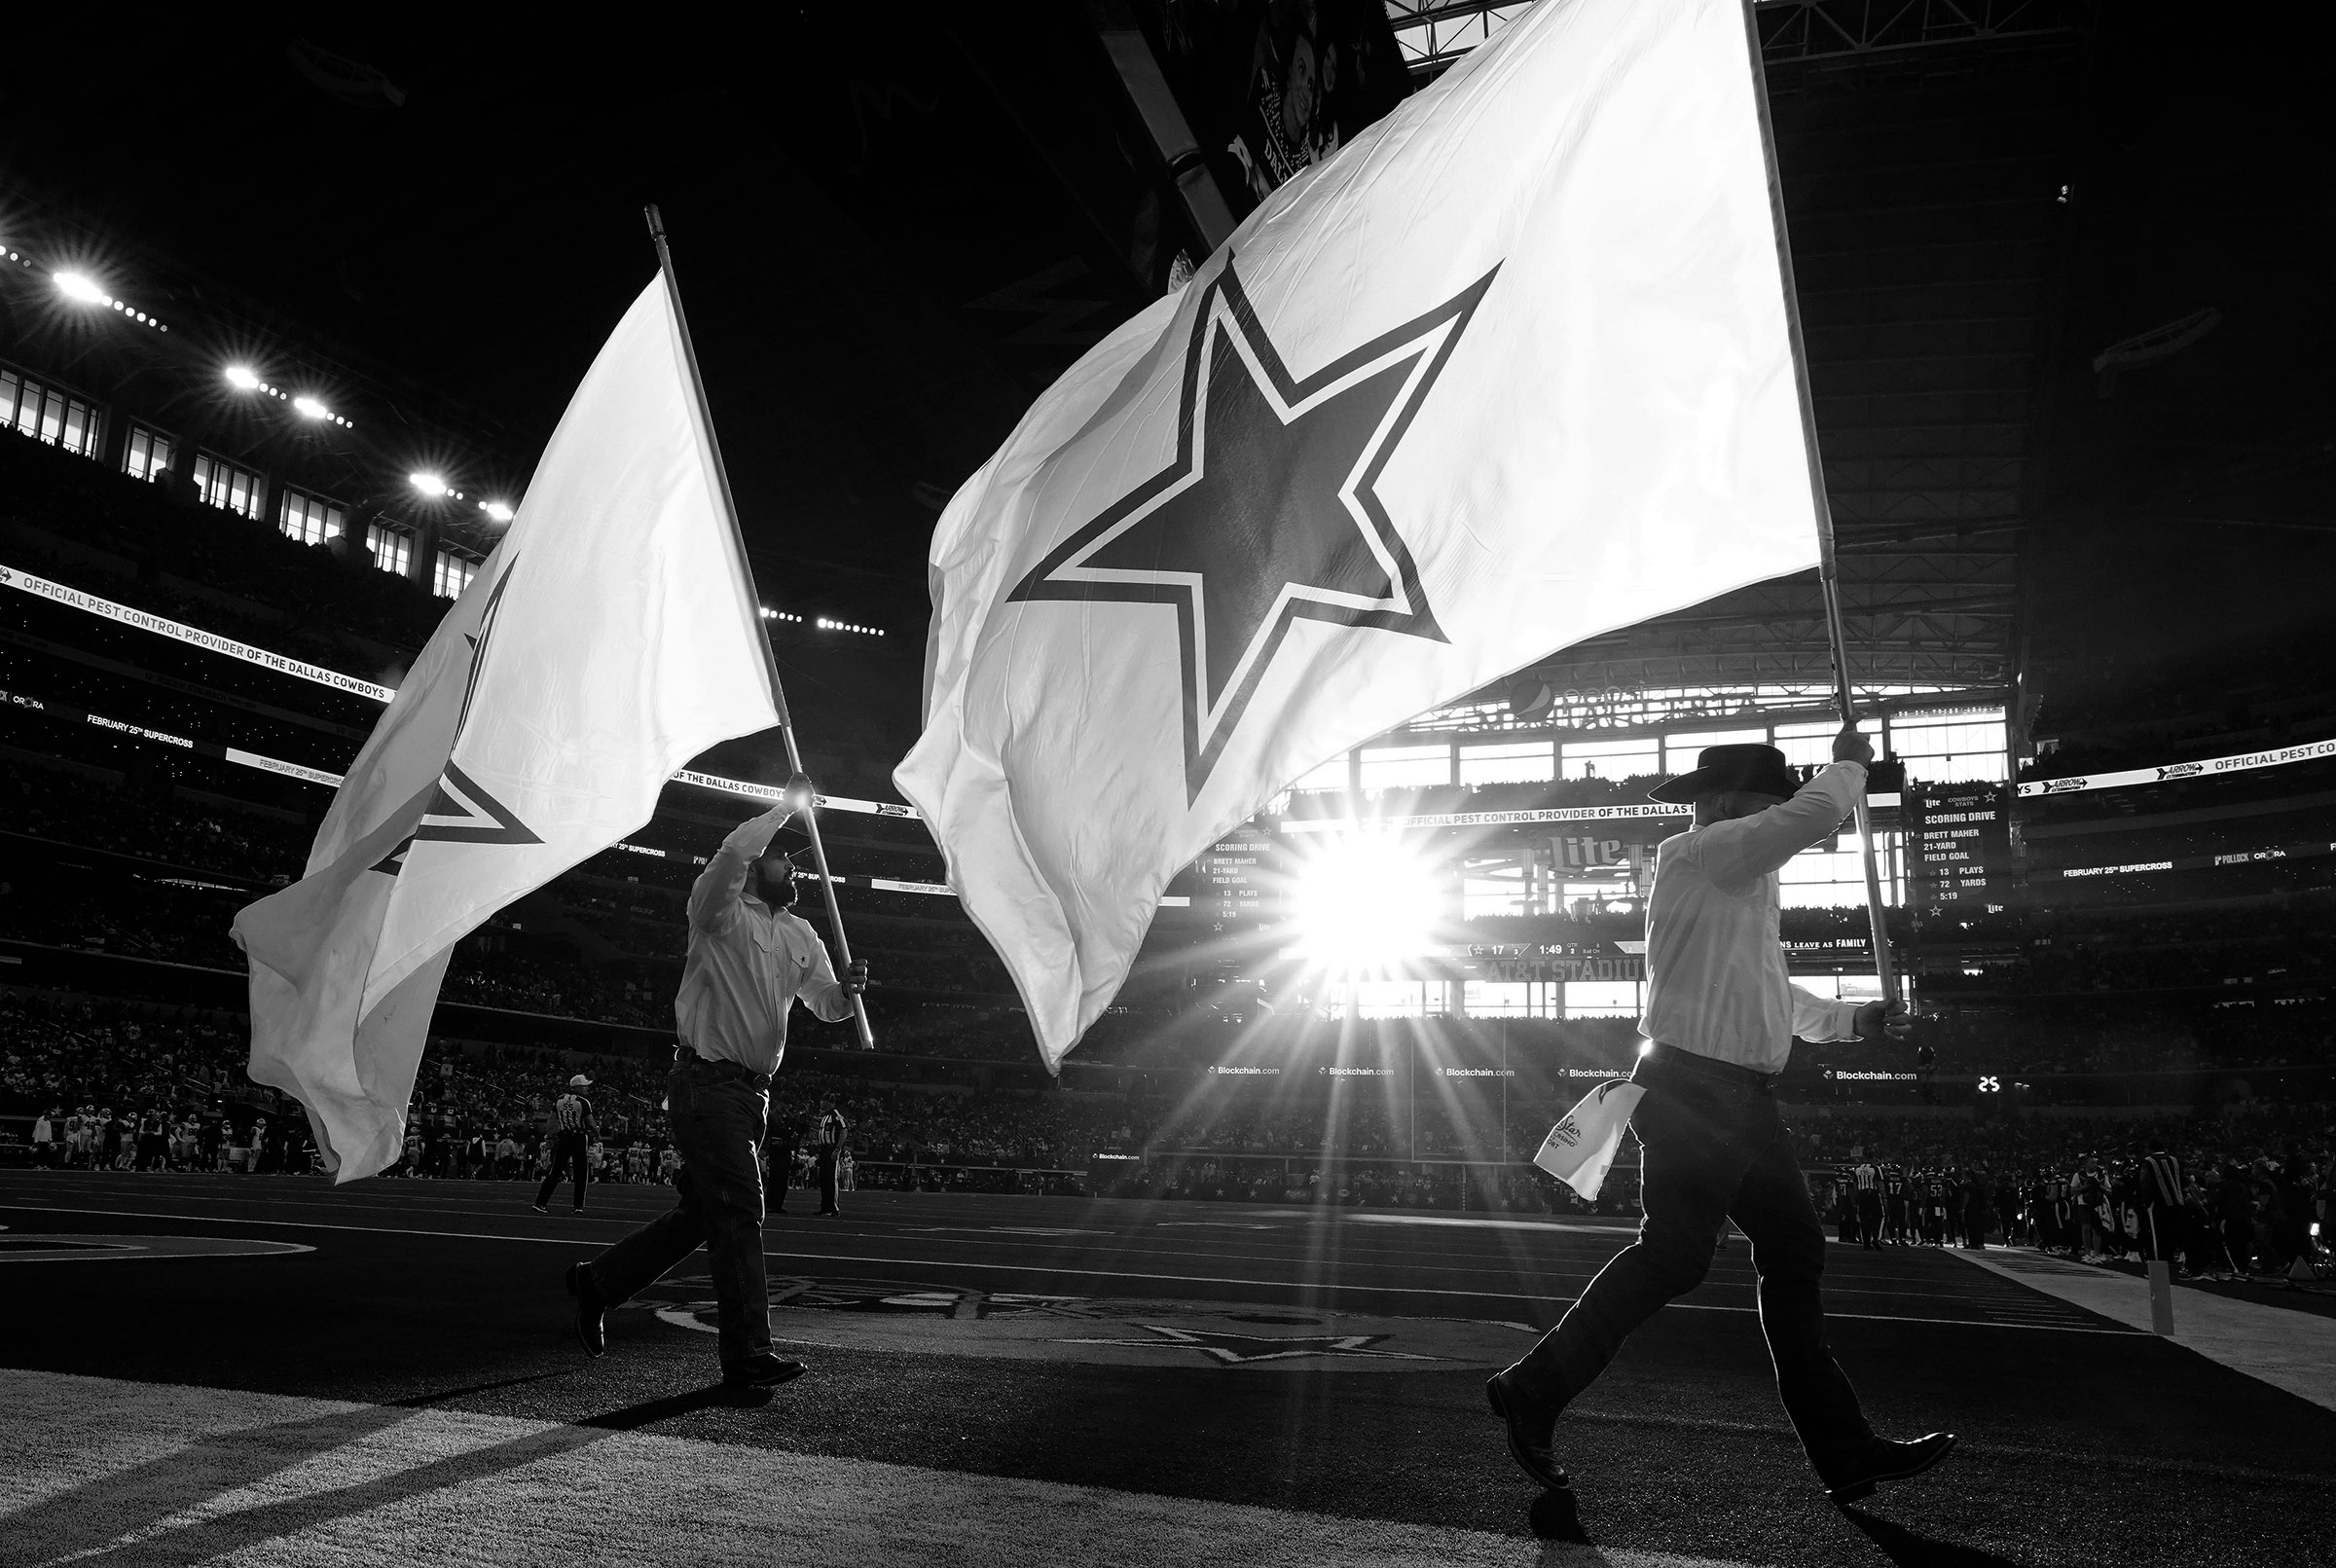 A Dallas Cowboys flag on the field during the first half in the game against the Philadelphia Eagles at AT&T Stadium in Arlington, Texas on Dec. 24, 2022 in Arlington.